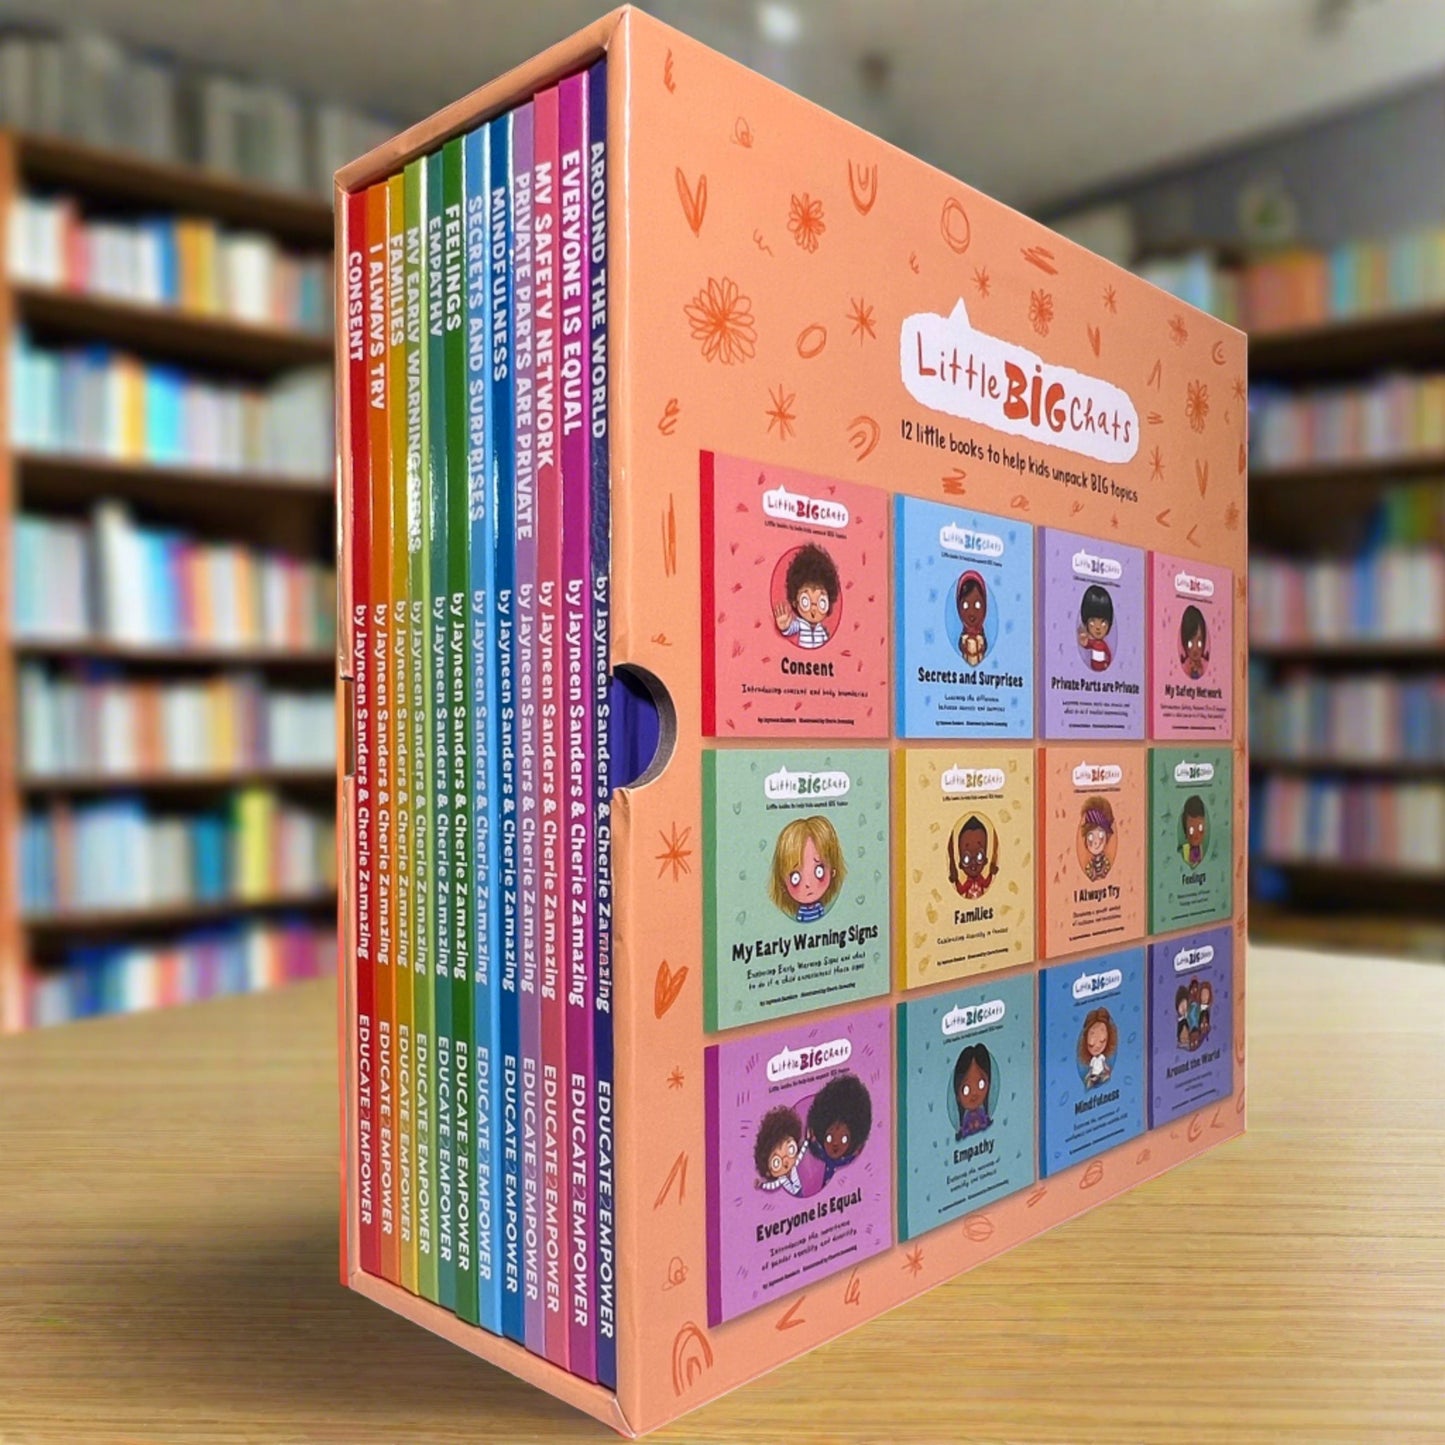 An image of the 'Little BIG Chats' set of 12 hardcover books in a slipcase.